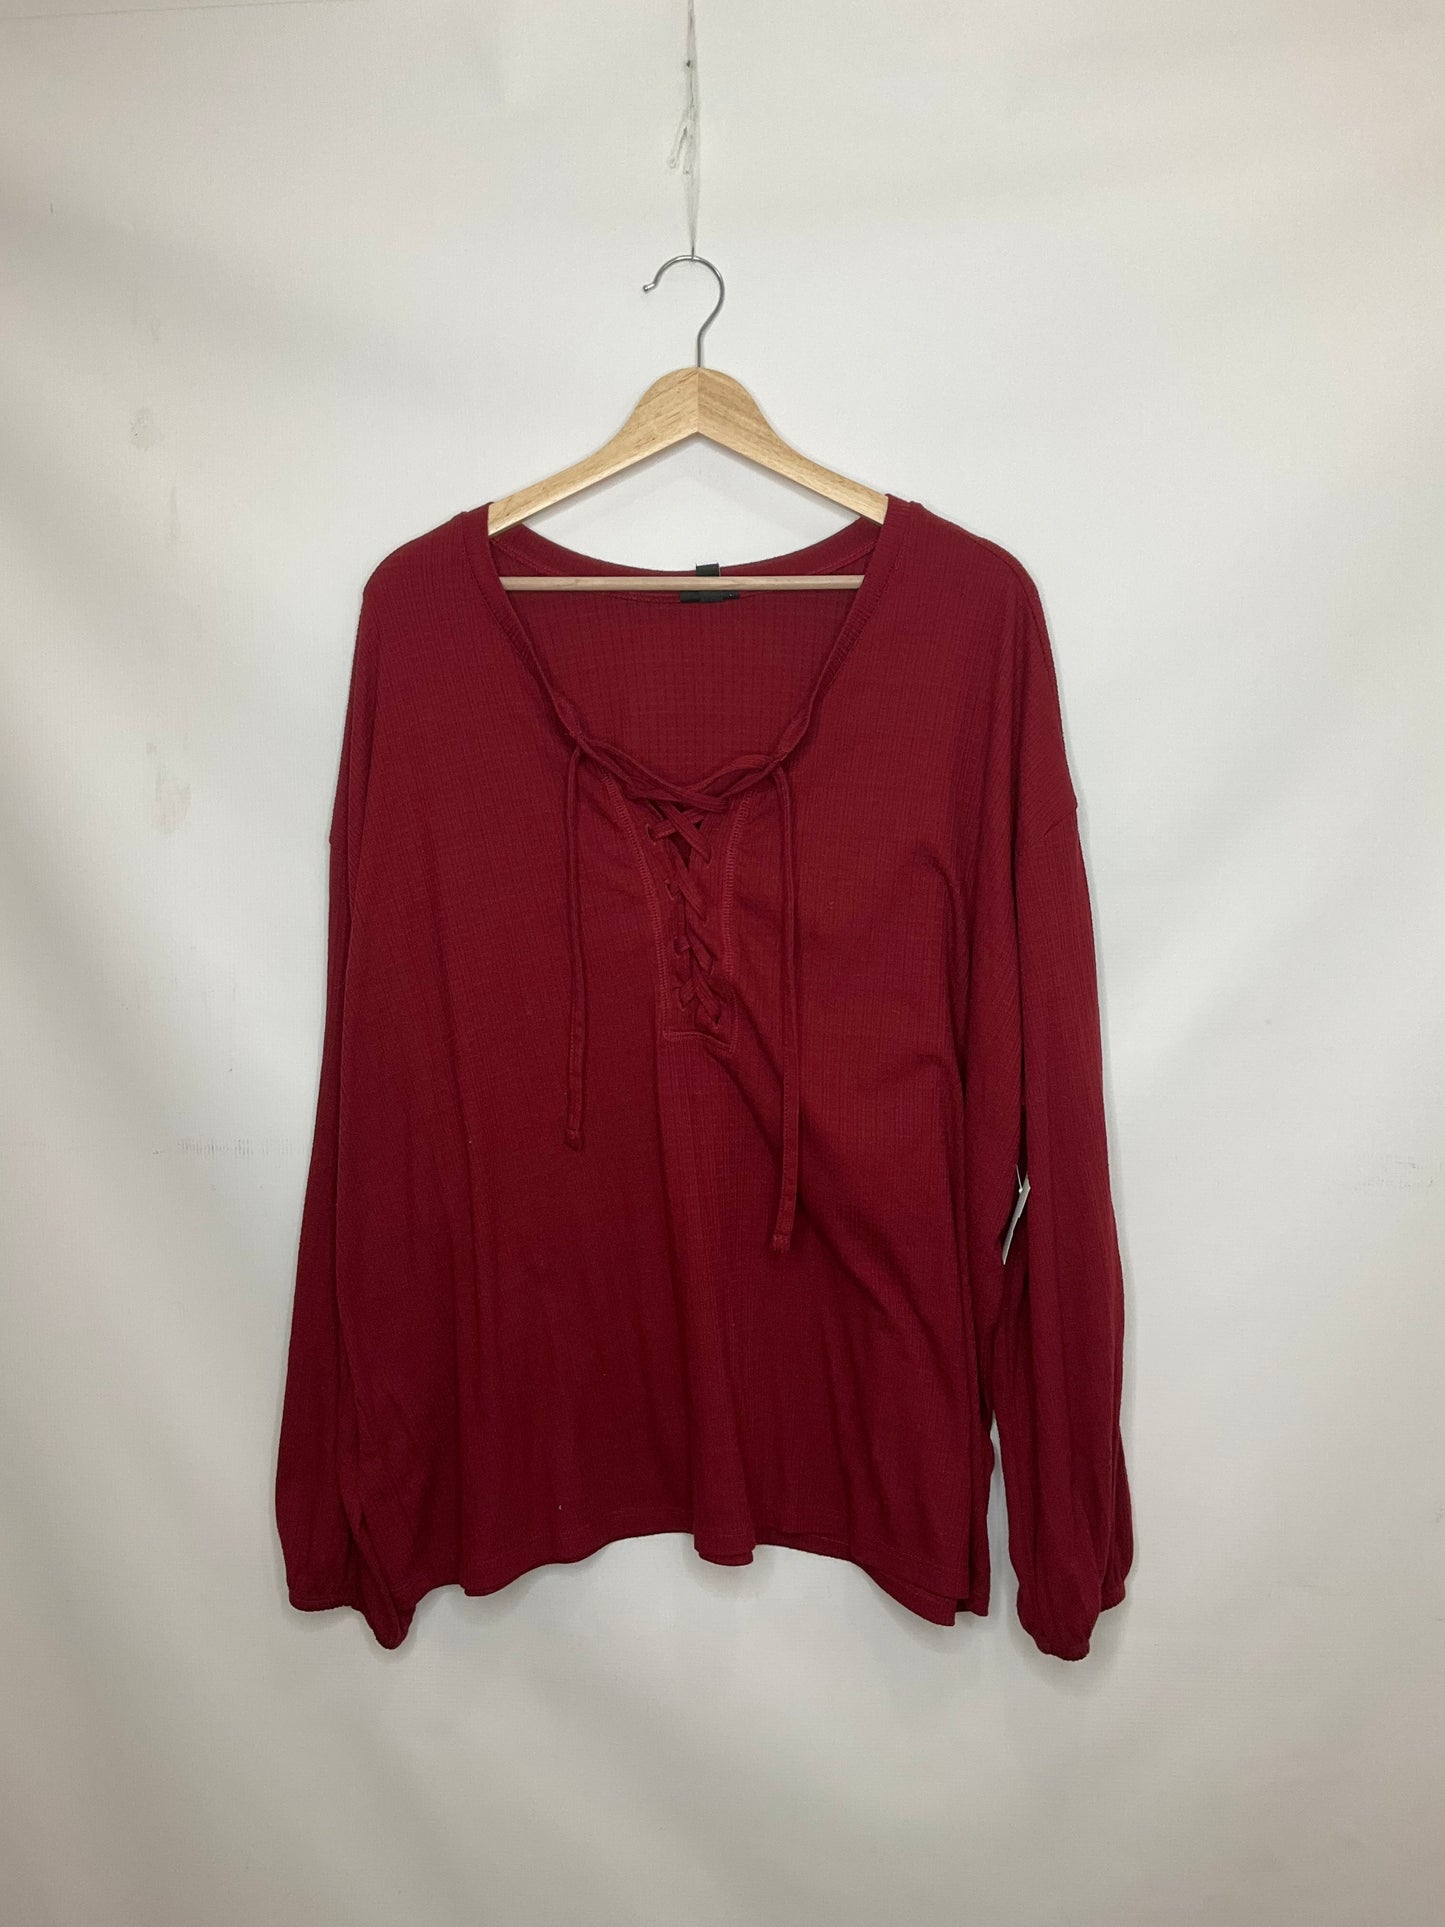 Red Top Long Sleeve Torrid, Size 3x